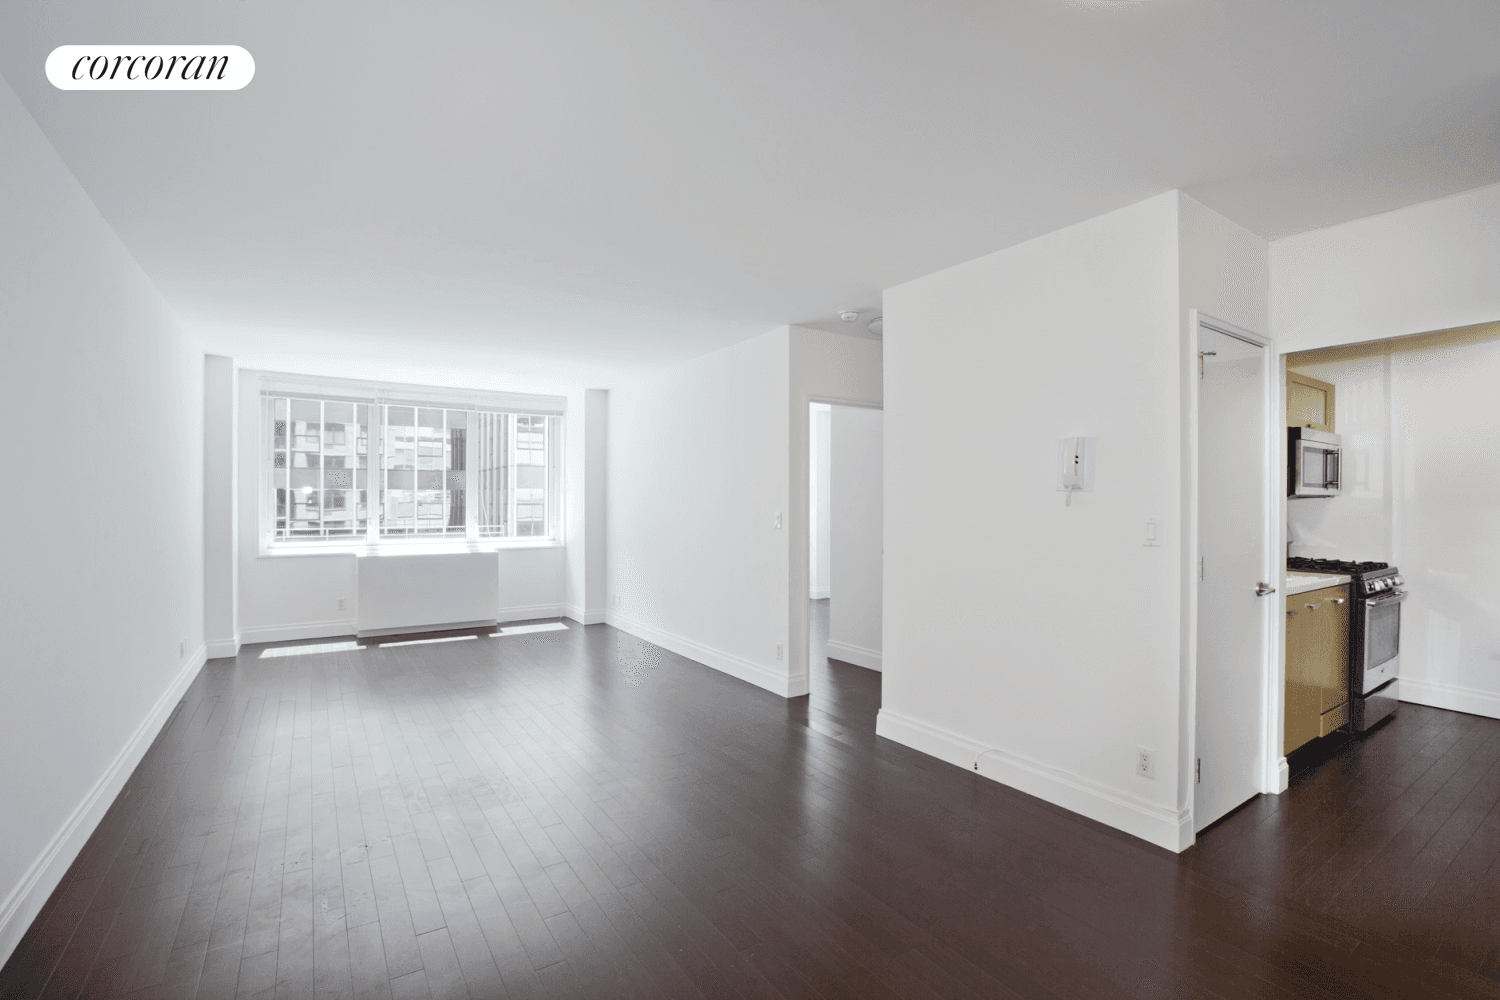 PRIME TURTLE BAY MIDTOWN EAST LOCATION FULL SERVICE CONDO LANDSCAPED ROOF DECK FITNESS CENTER DESIGNED BY LA PALESTRA SOUTHERNEXPOSUREThis spacious 1br home at the L'Ecole at 212 East 47thStreet is ...